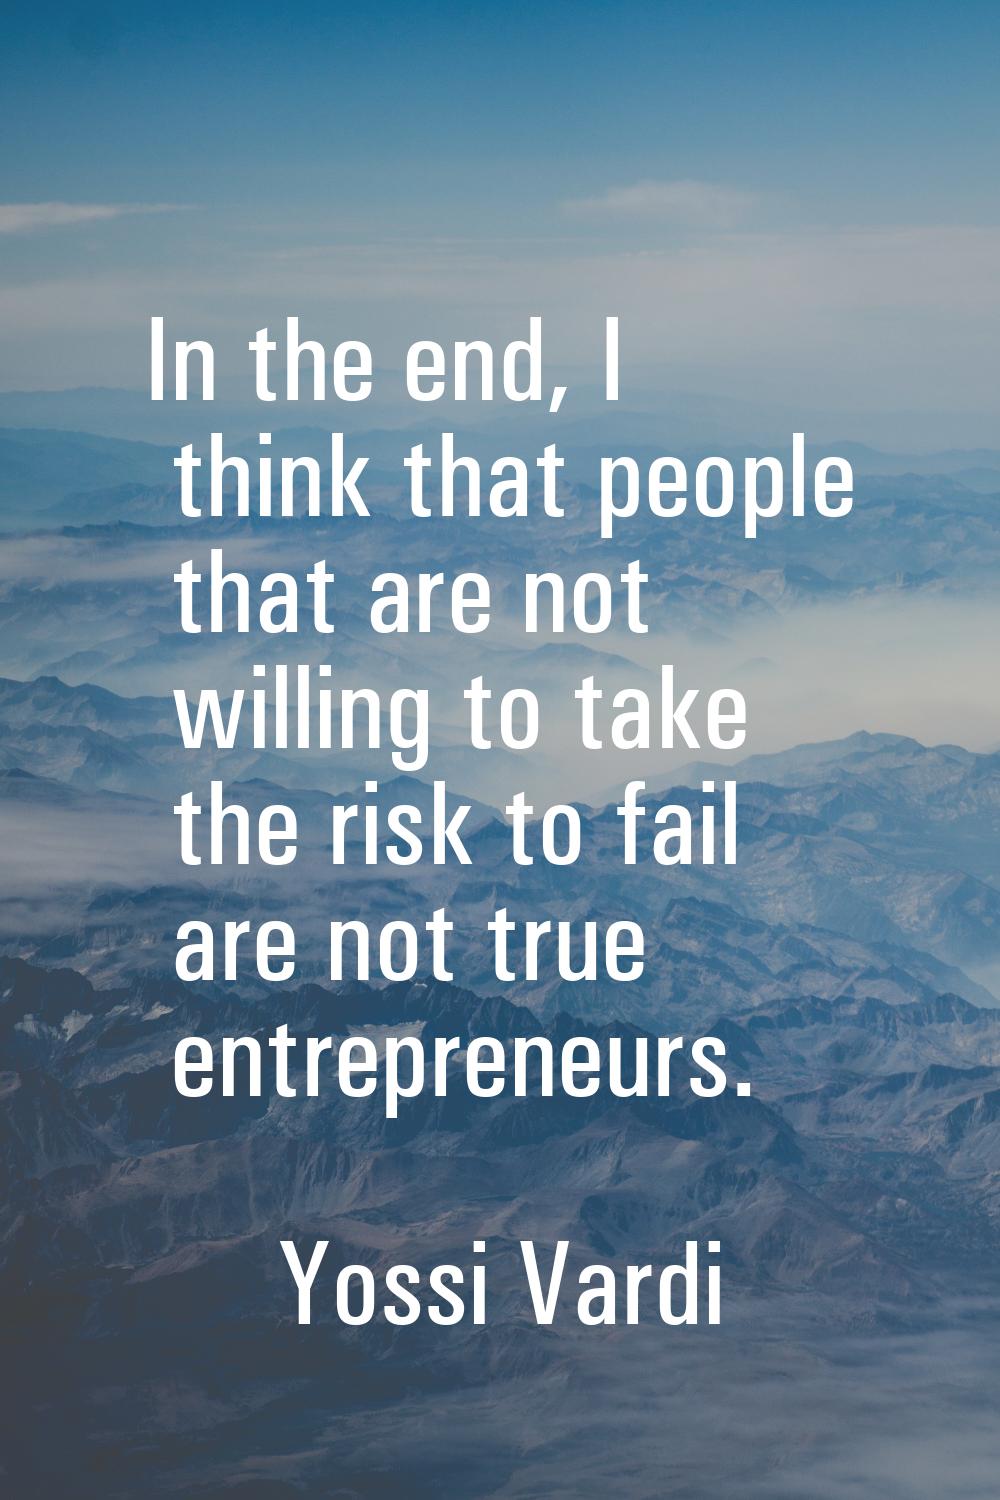 In the end, I think that people that are not willing to take the risk to fail are not true entrepre